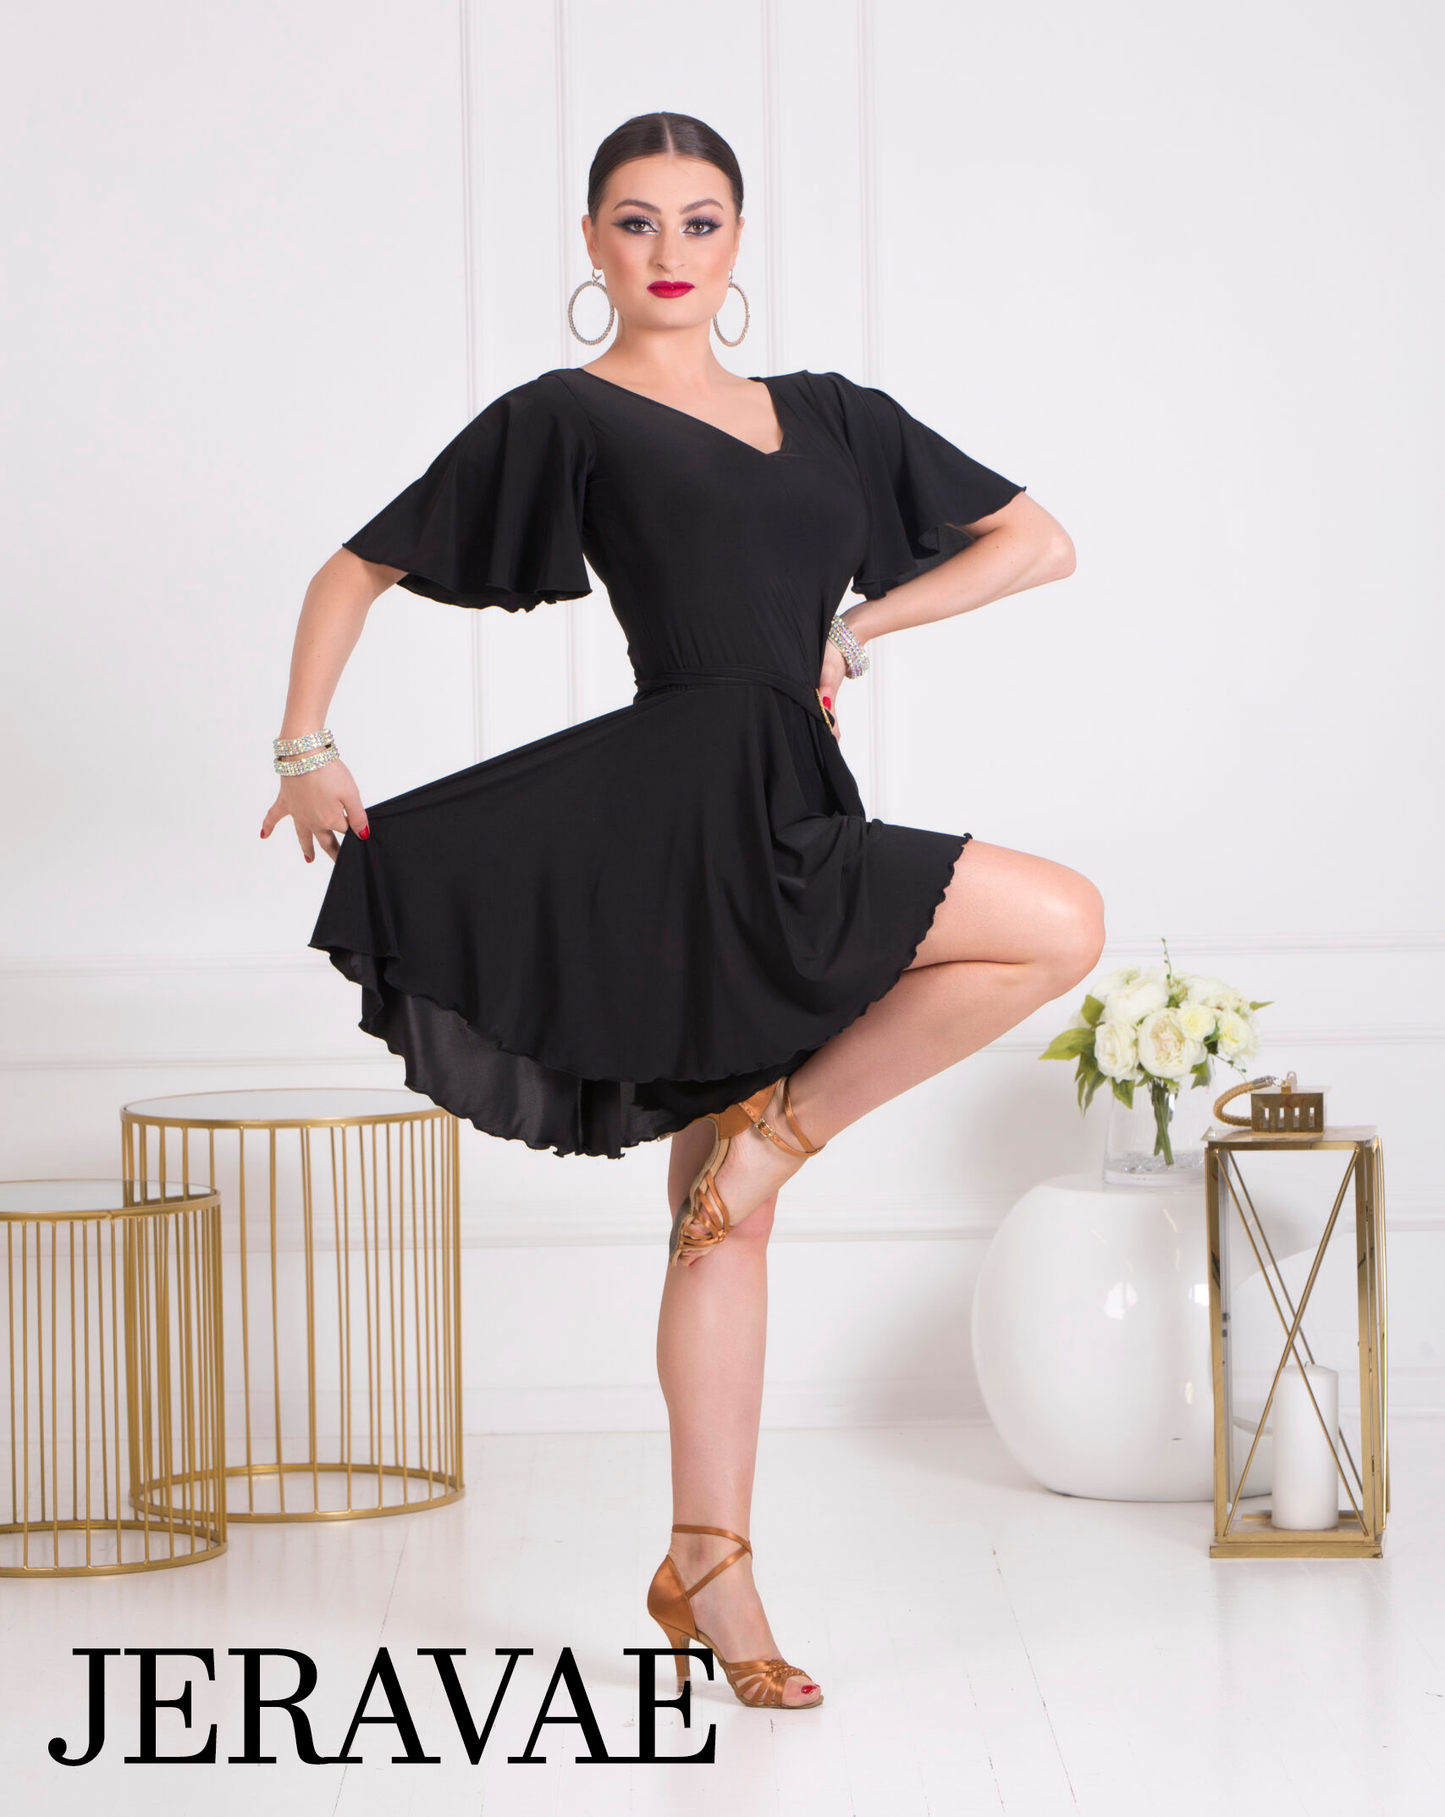 Senga Dancewear PARA PARA Black Jumpsuit with Shorts, Belt with Decorative Buckle, and Loose Sleeves PRA 1070 in Stock